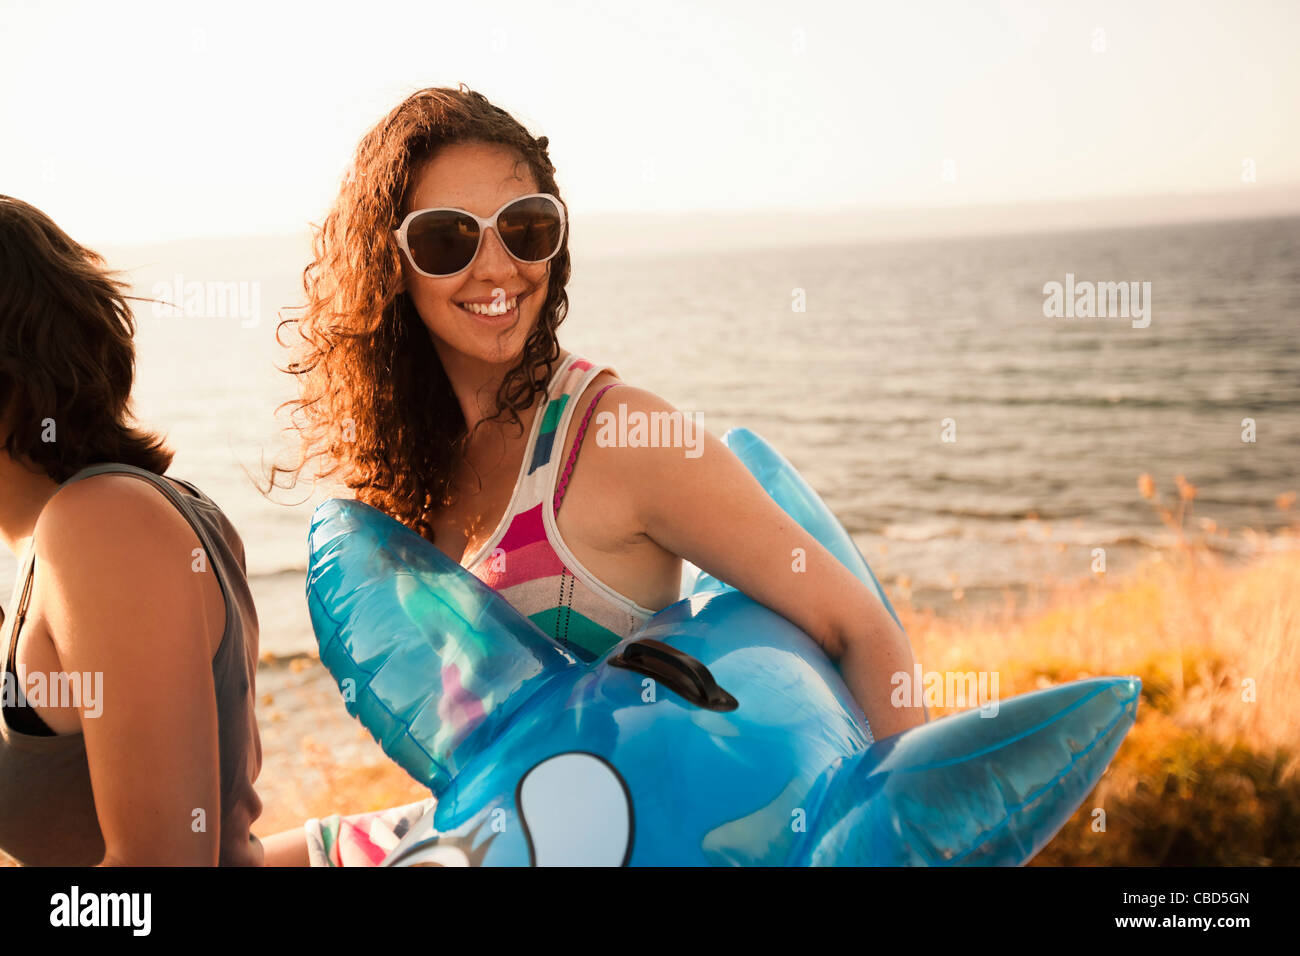 Femme transportant inflatable toy on beach Banque D'Images